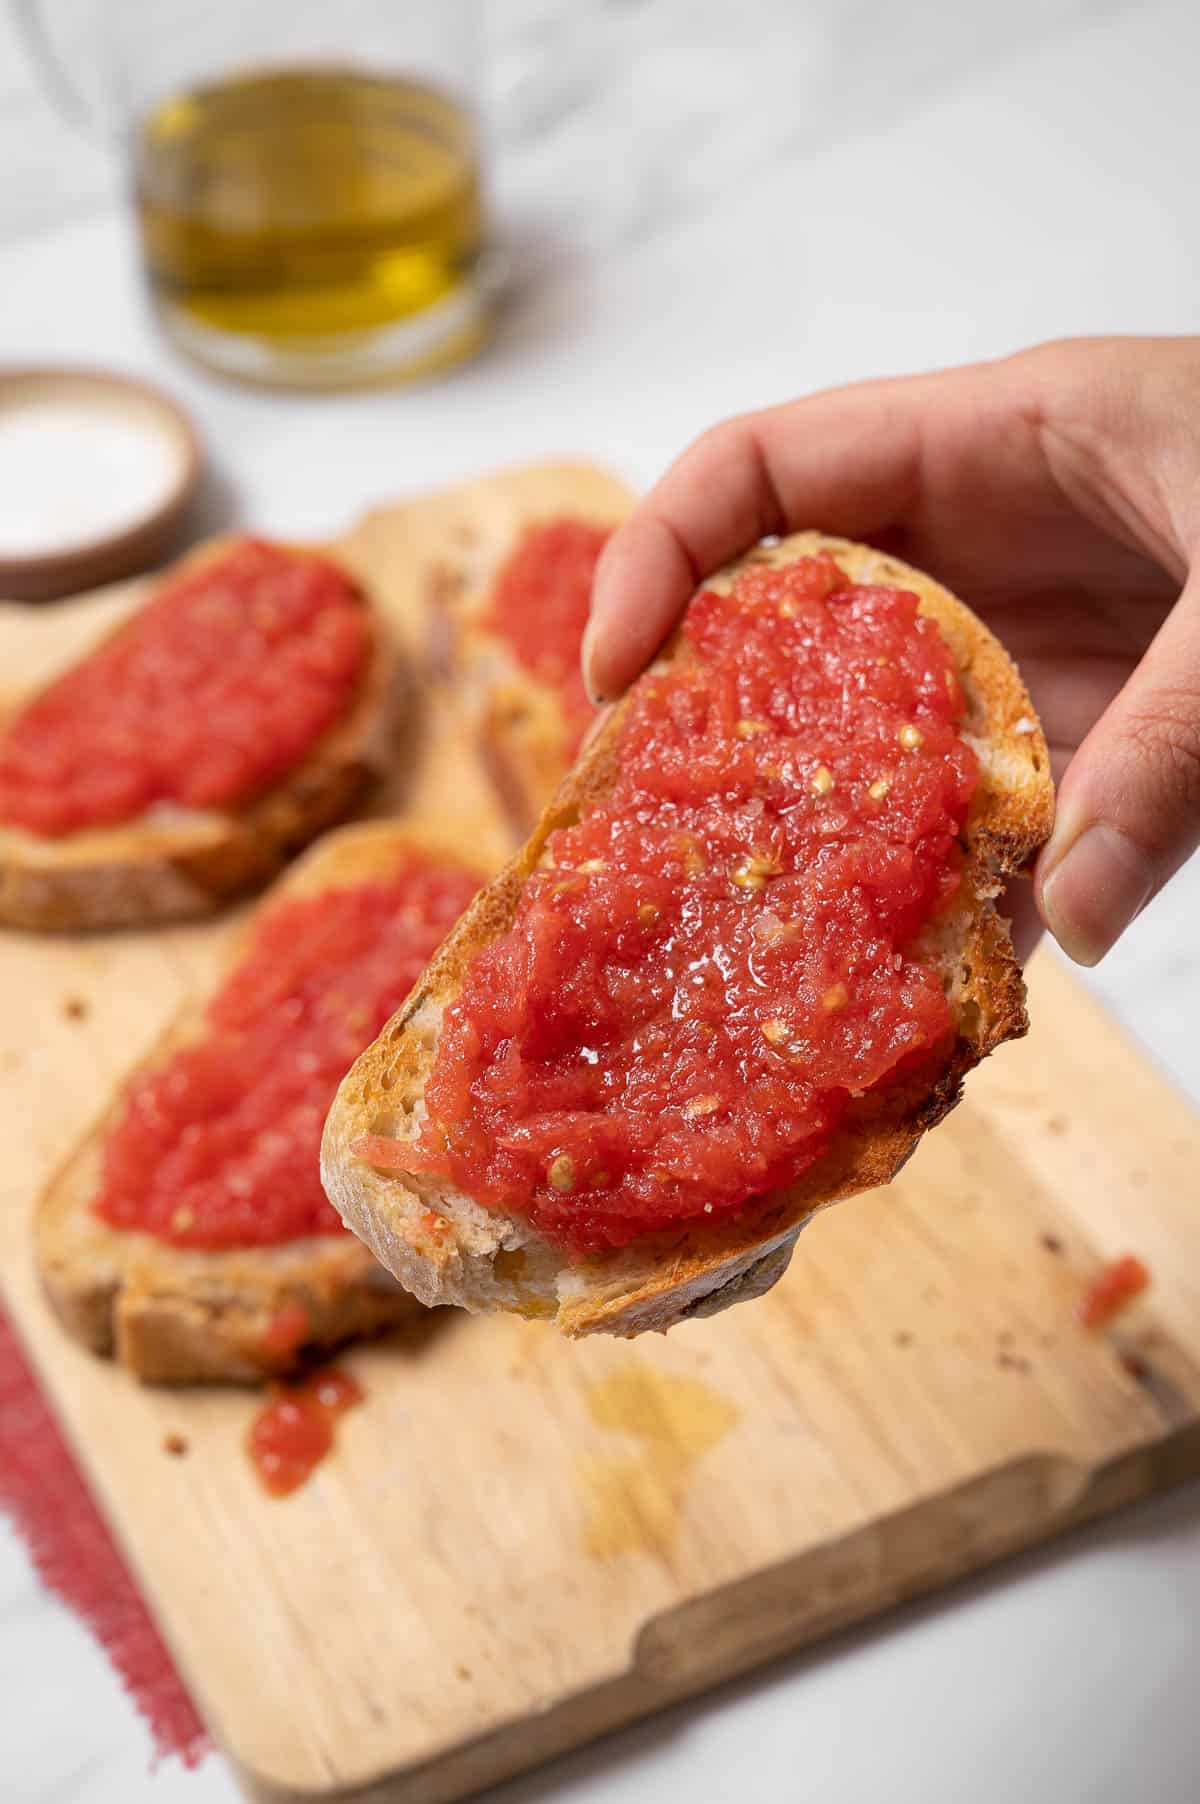 A hand holding a slice of Pan con tomate